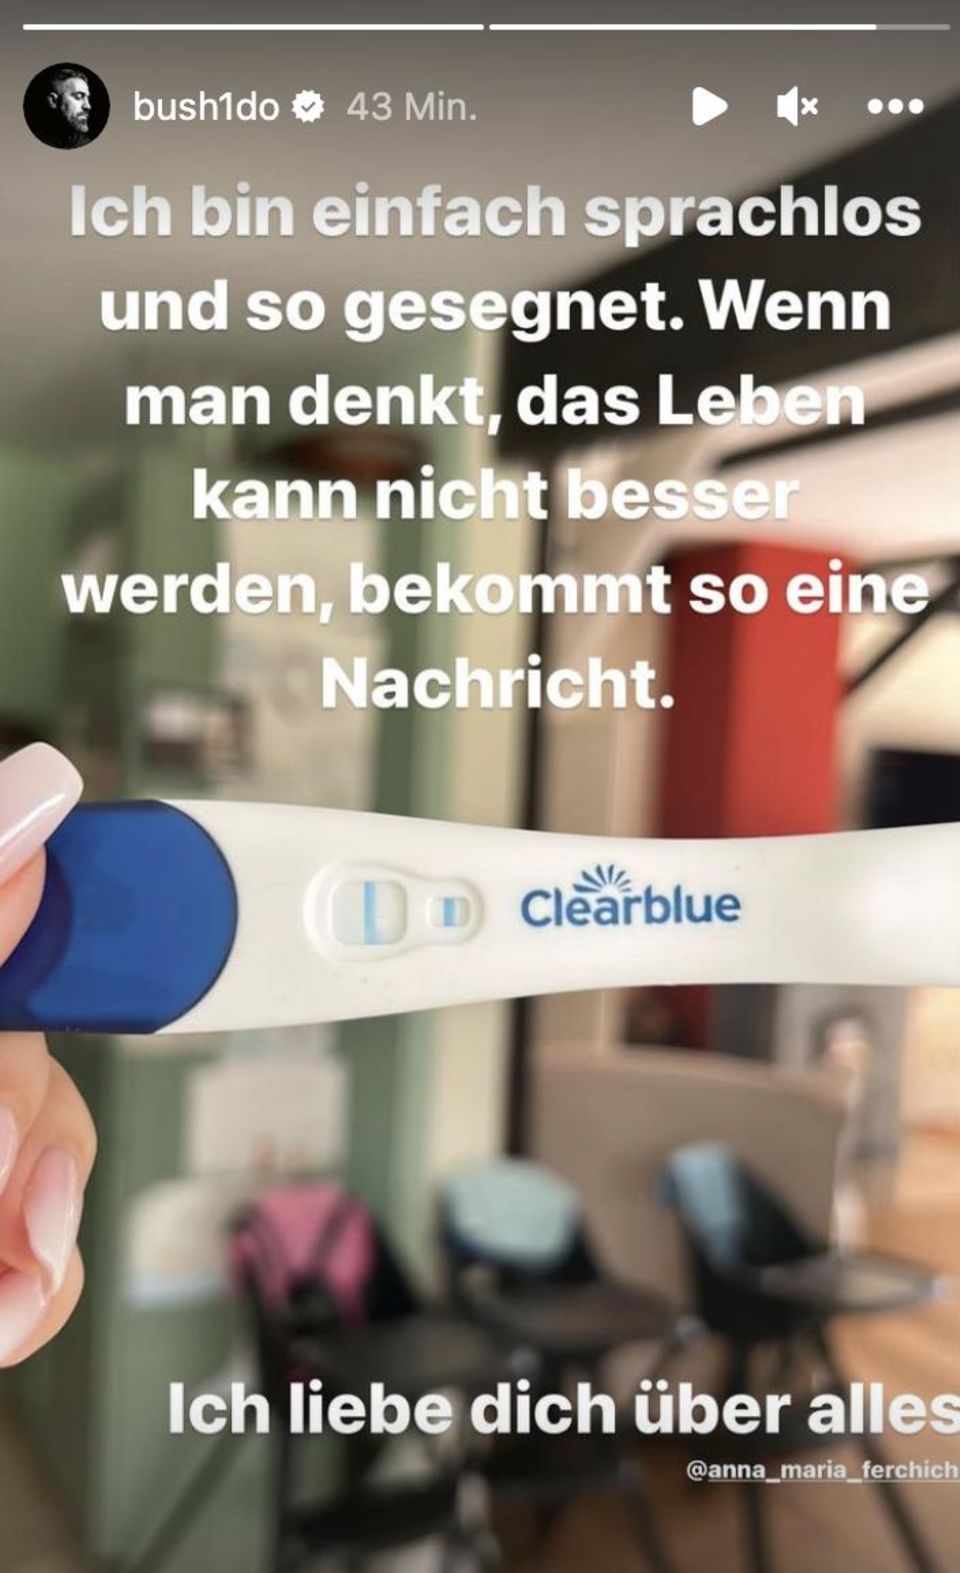 In his Instagram story, Bushido is happy about his wife's positive pregnancy test. 